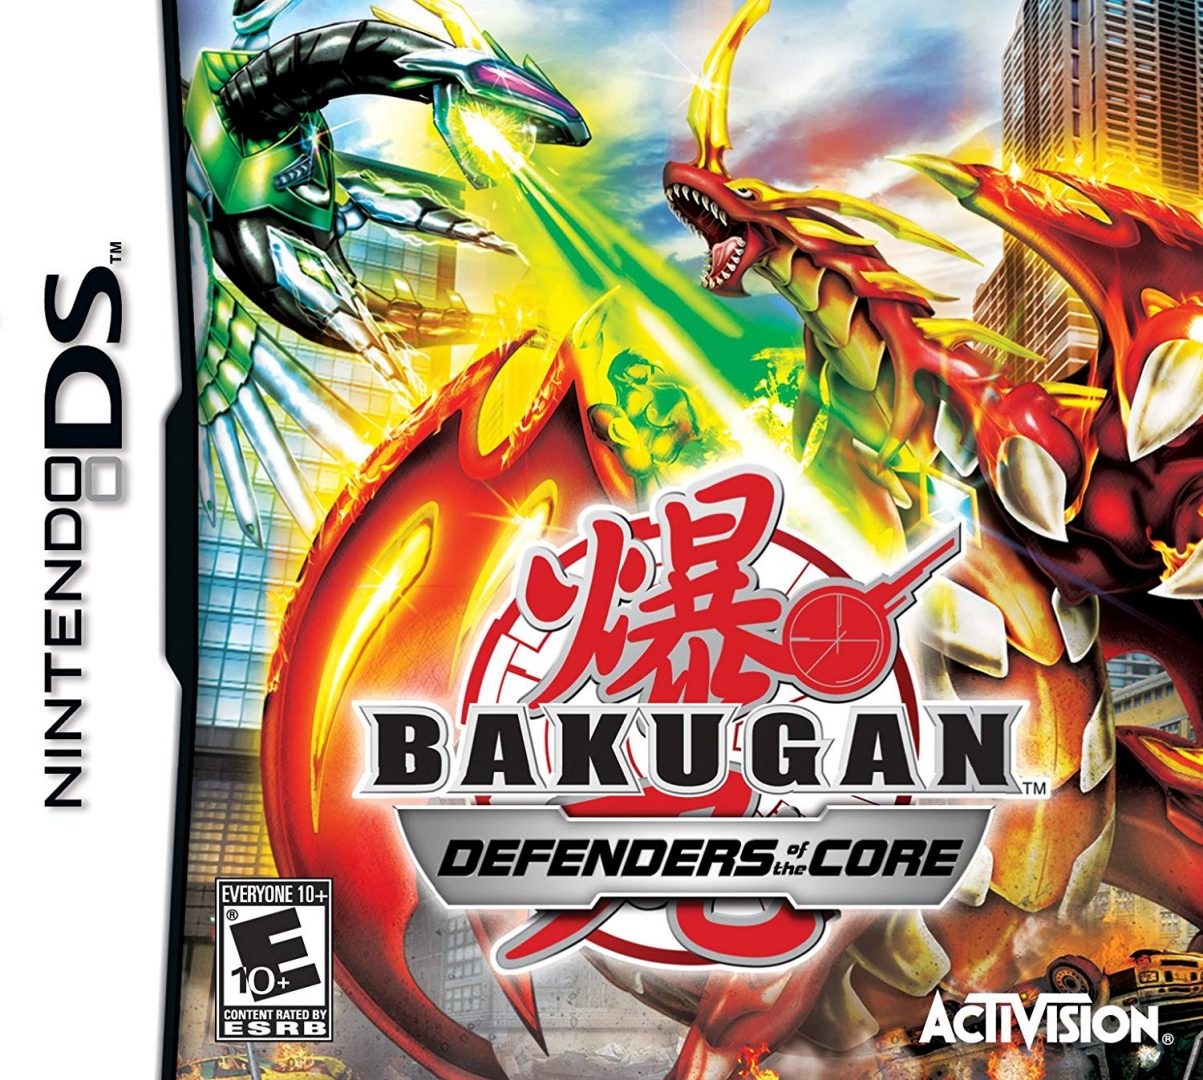 The coverart image of Bakugan: Defenders of the Core 